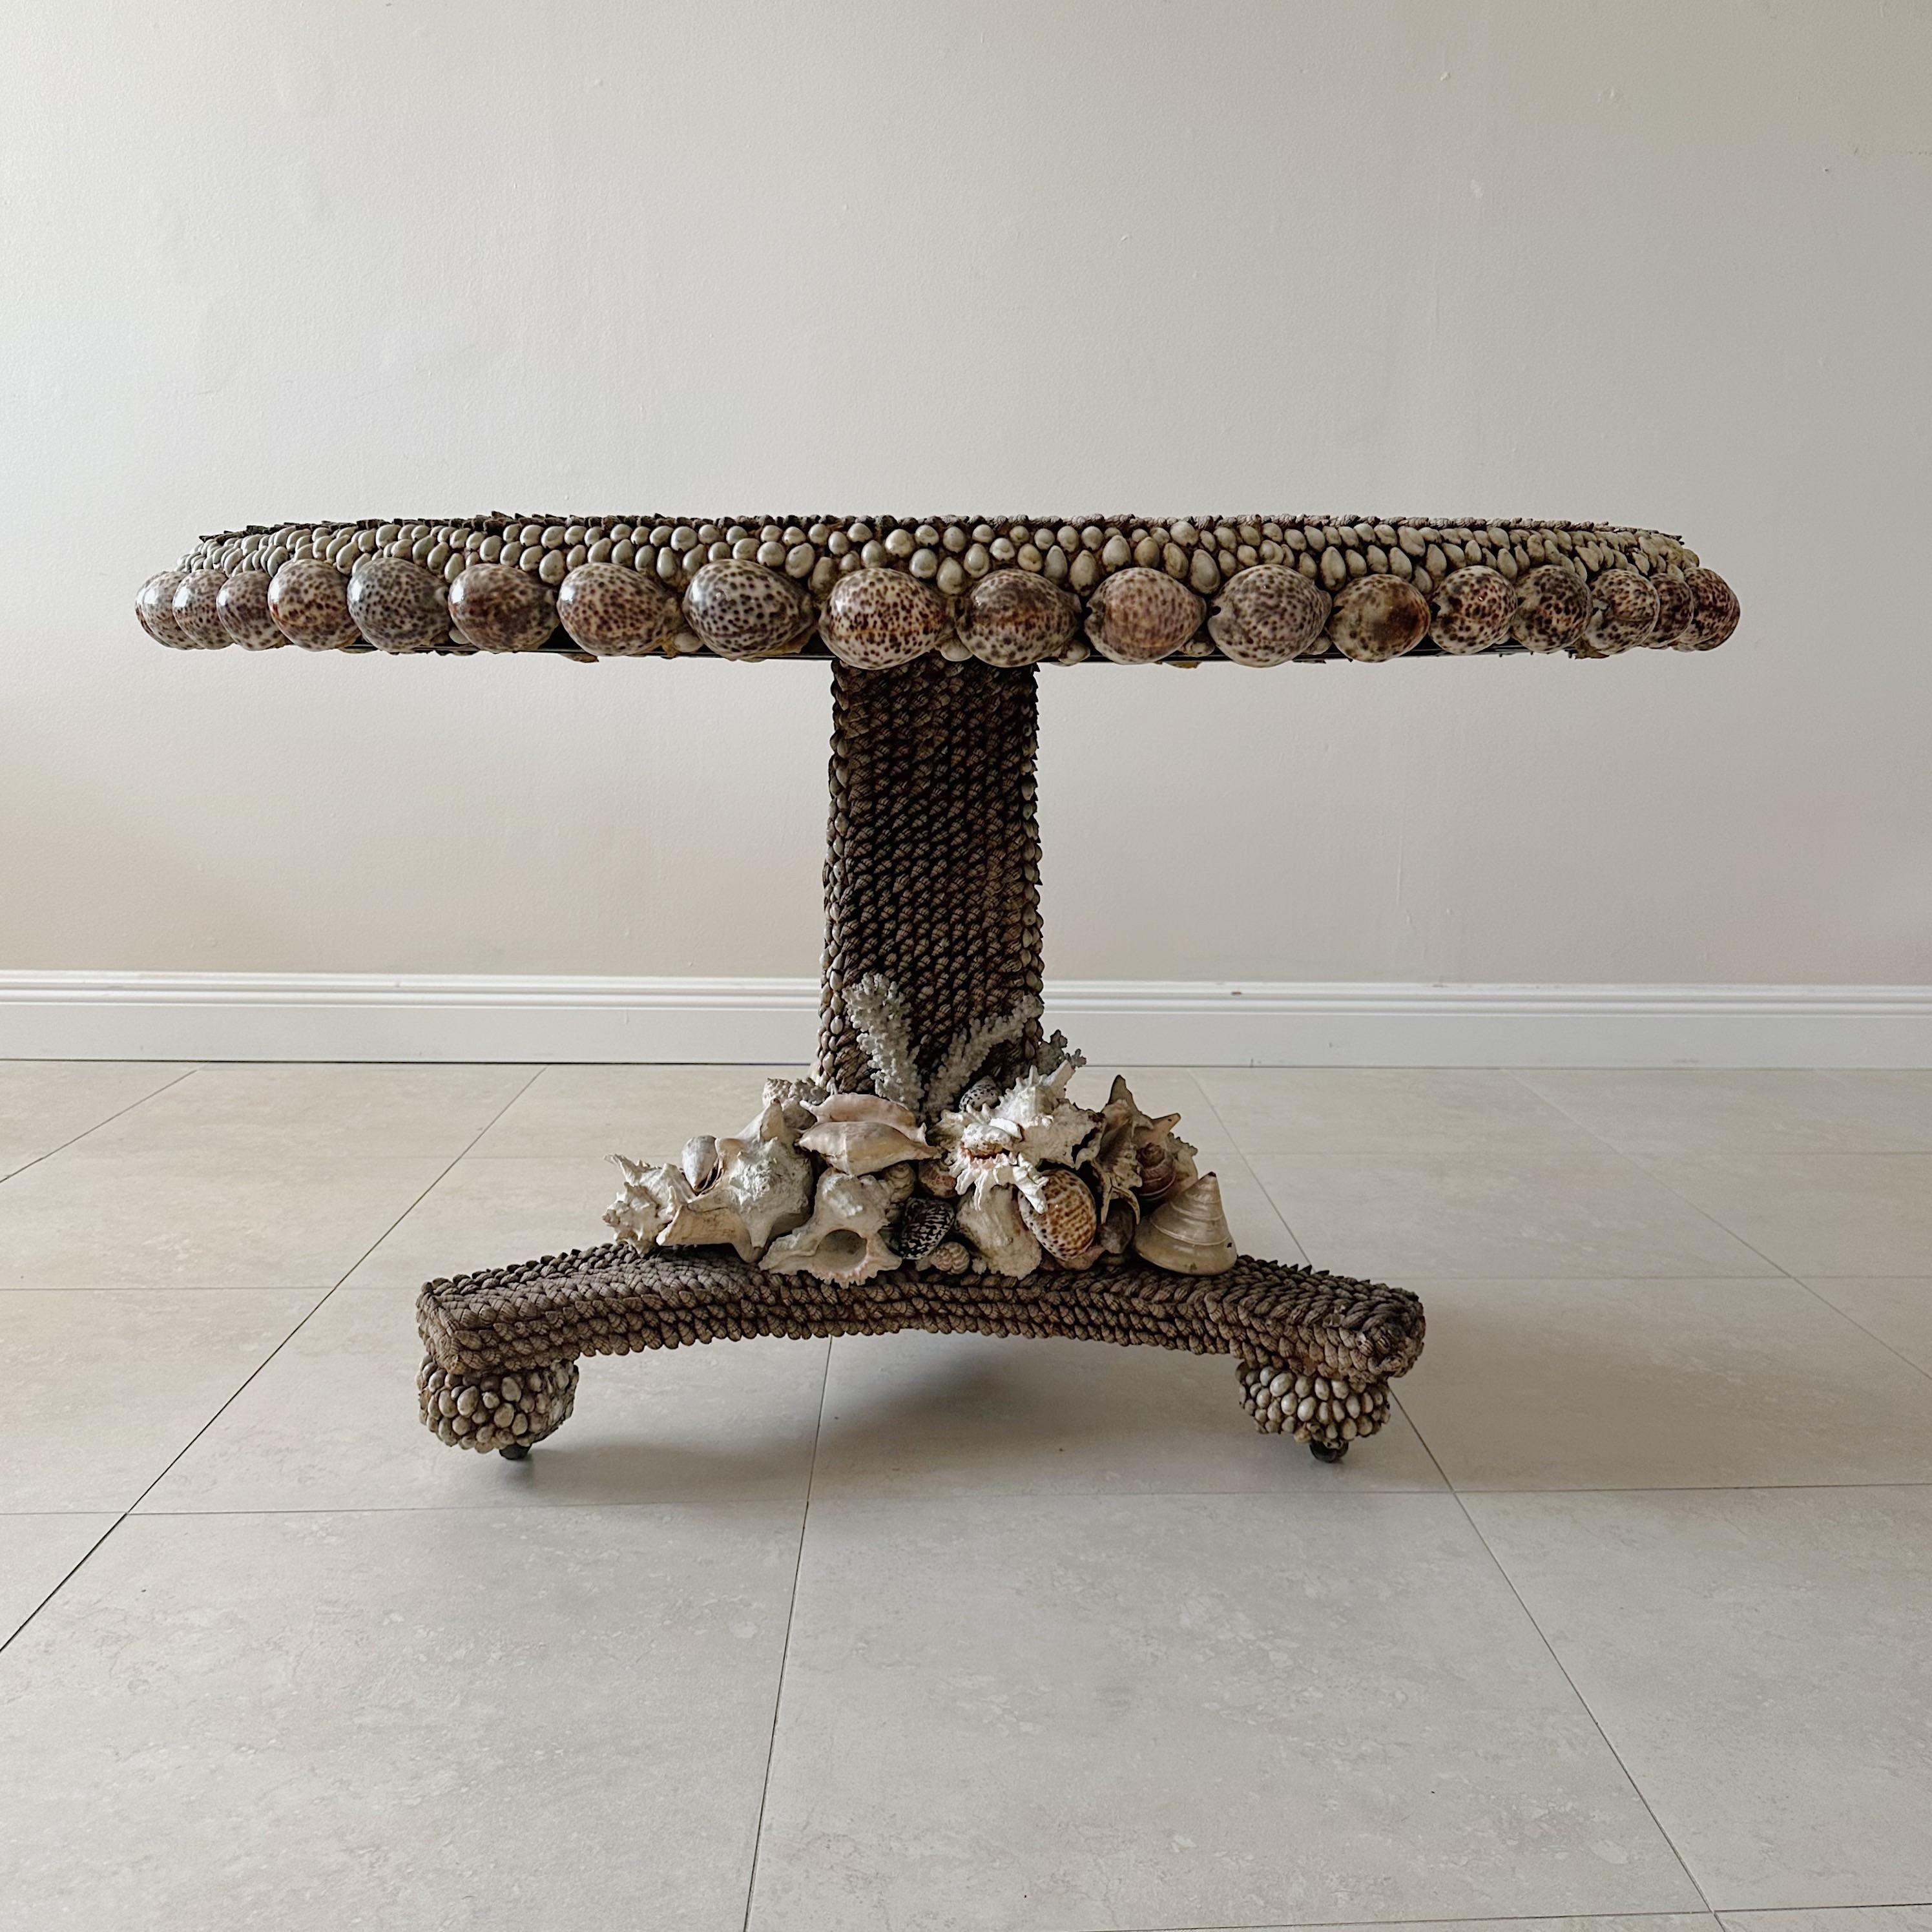 An exquisite center table meticulously handcrafted by the renowned artist Anthony Redmile, born in 1940. This masterpiece boasts a surface adorned with a stunning assortment of molluscan and cowrie shells. Atop the table rests a signature silvered